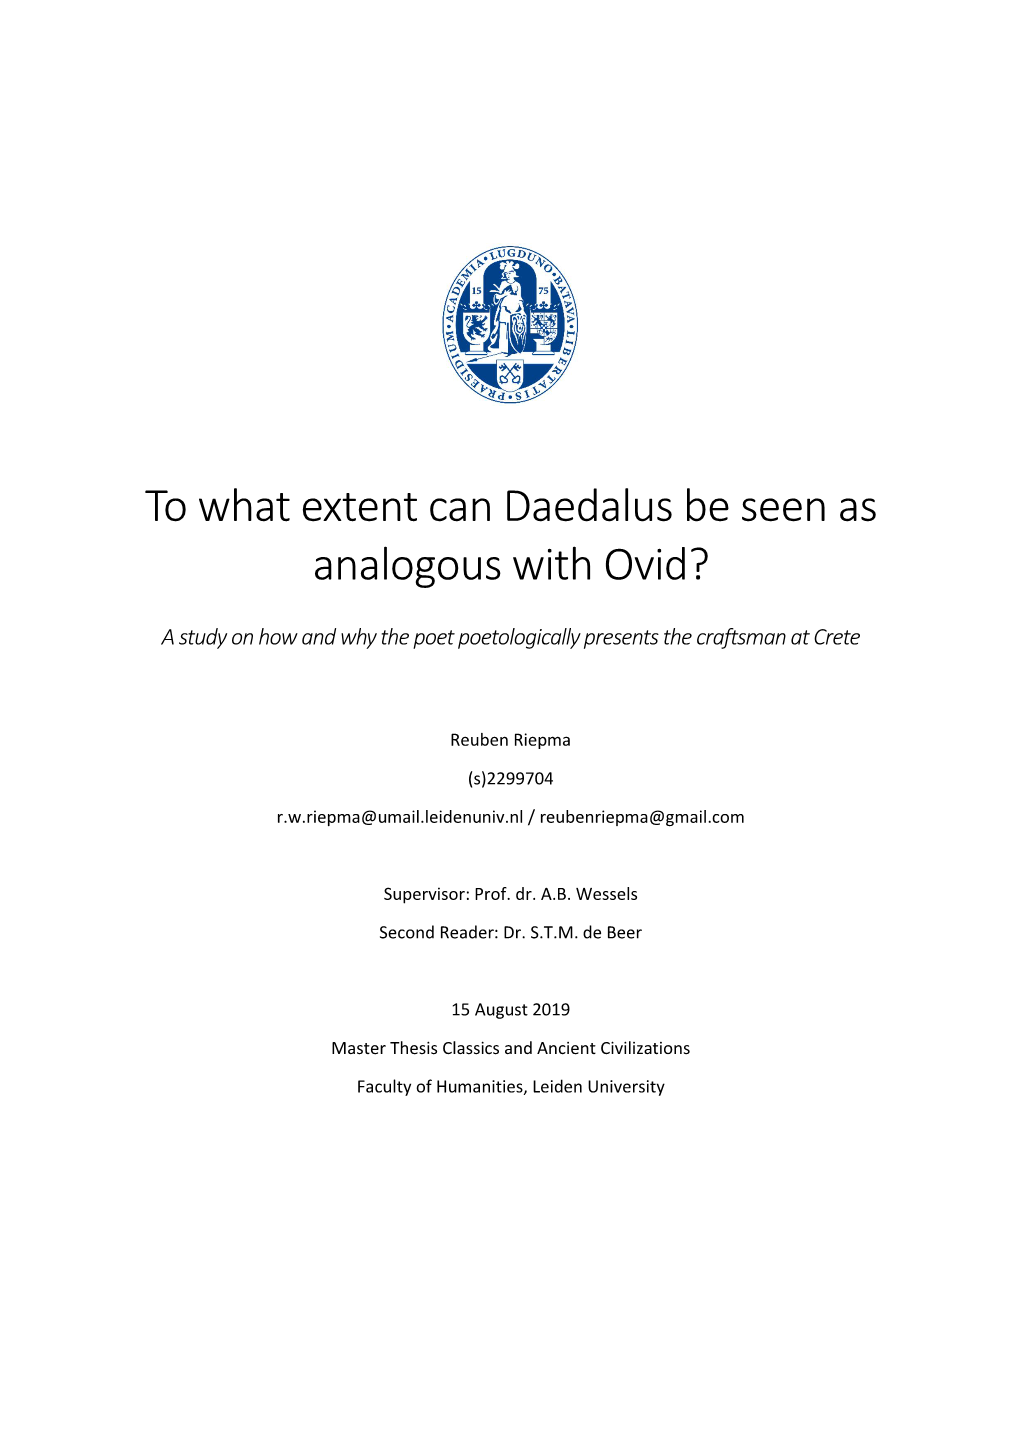 To What Extent Can Daedalus Be Seen As Analogous with Ovid?